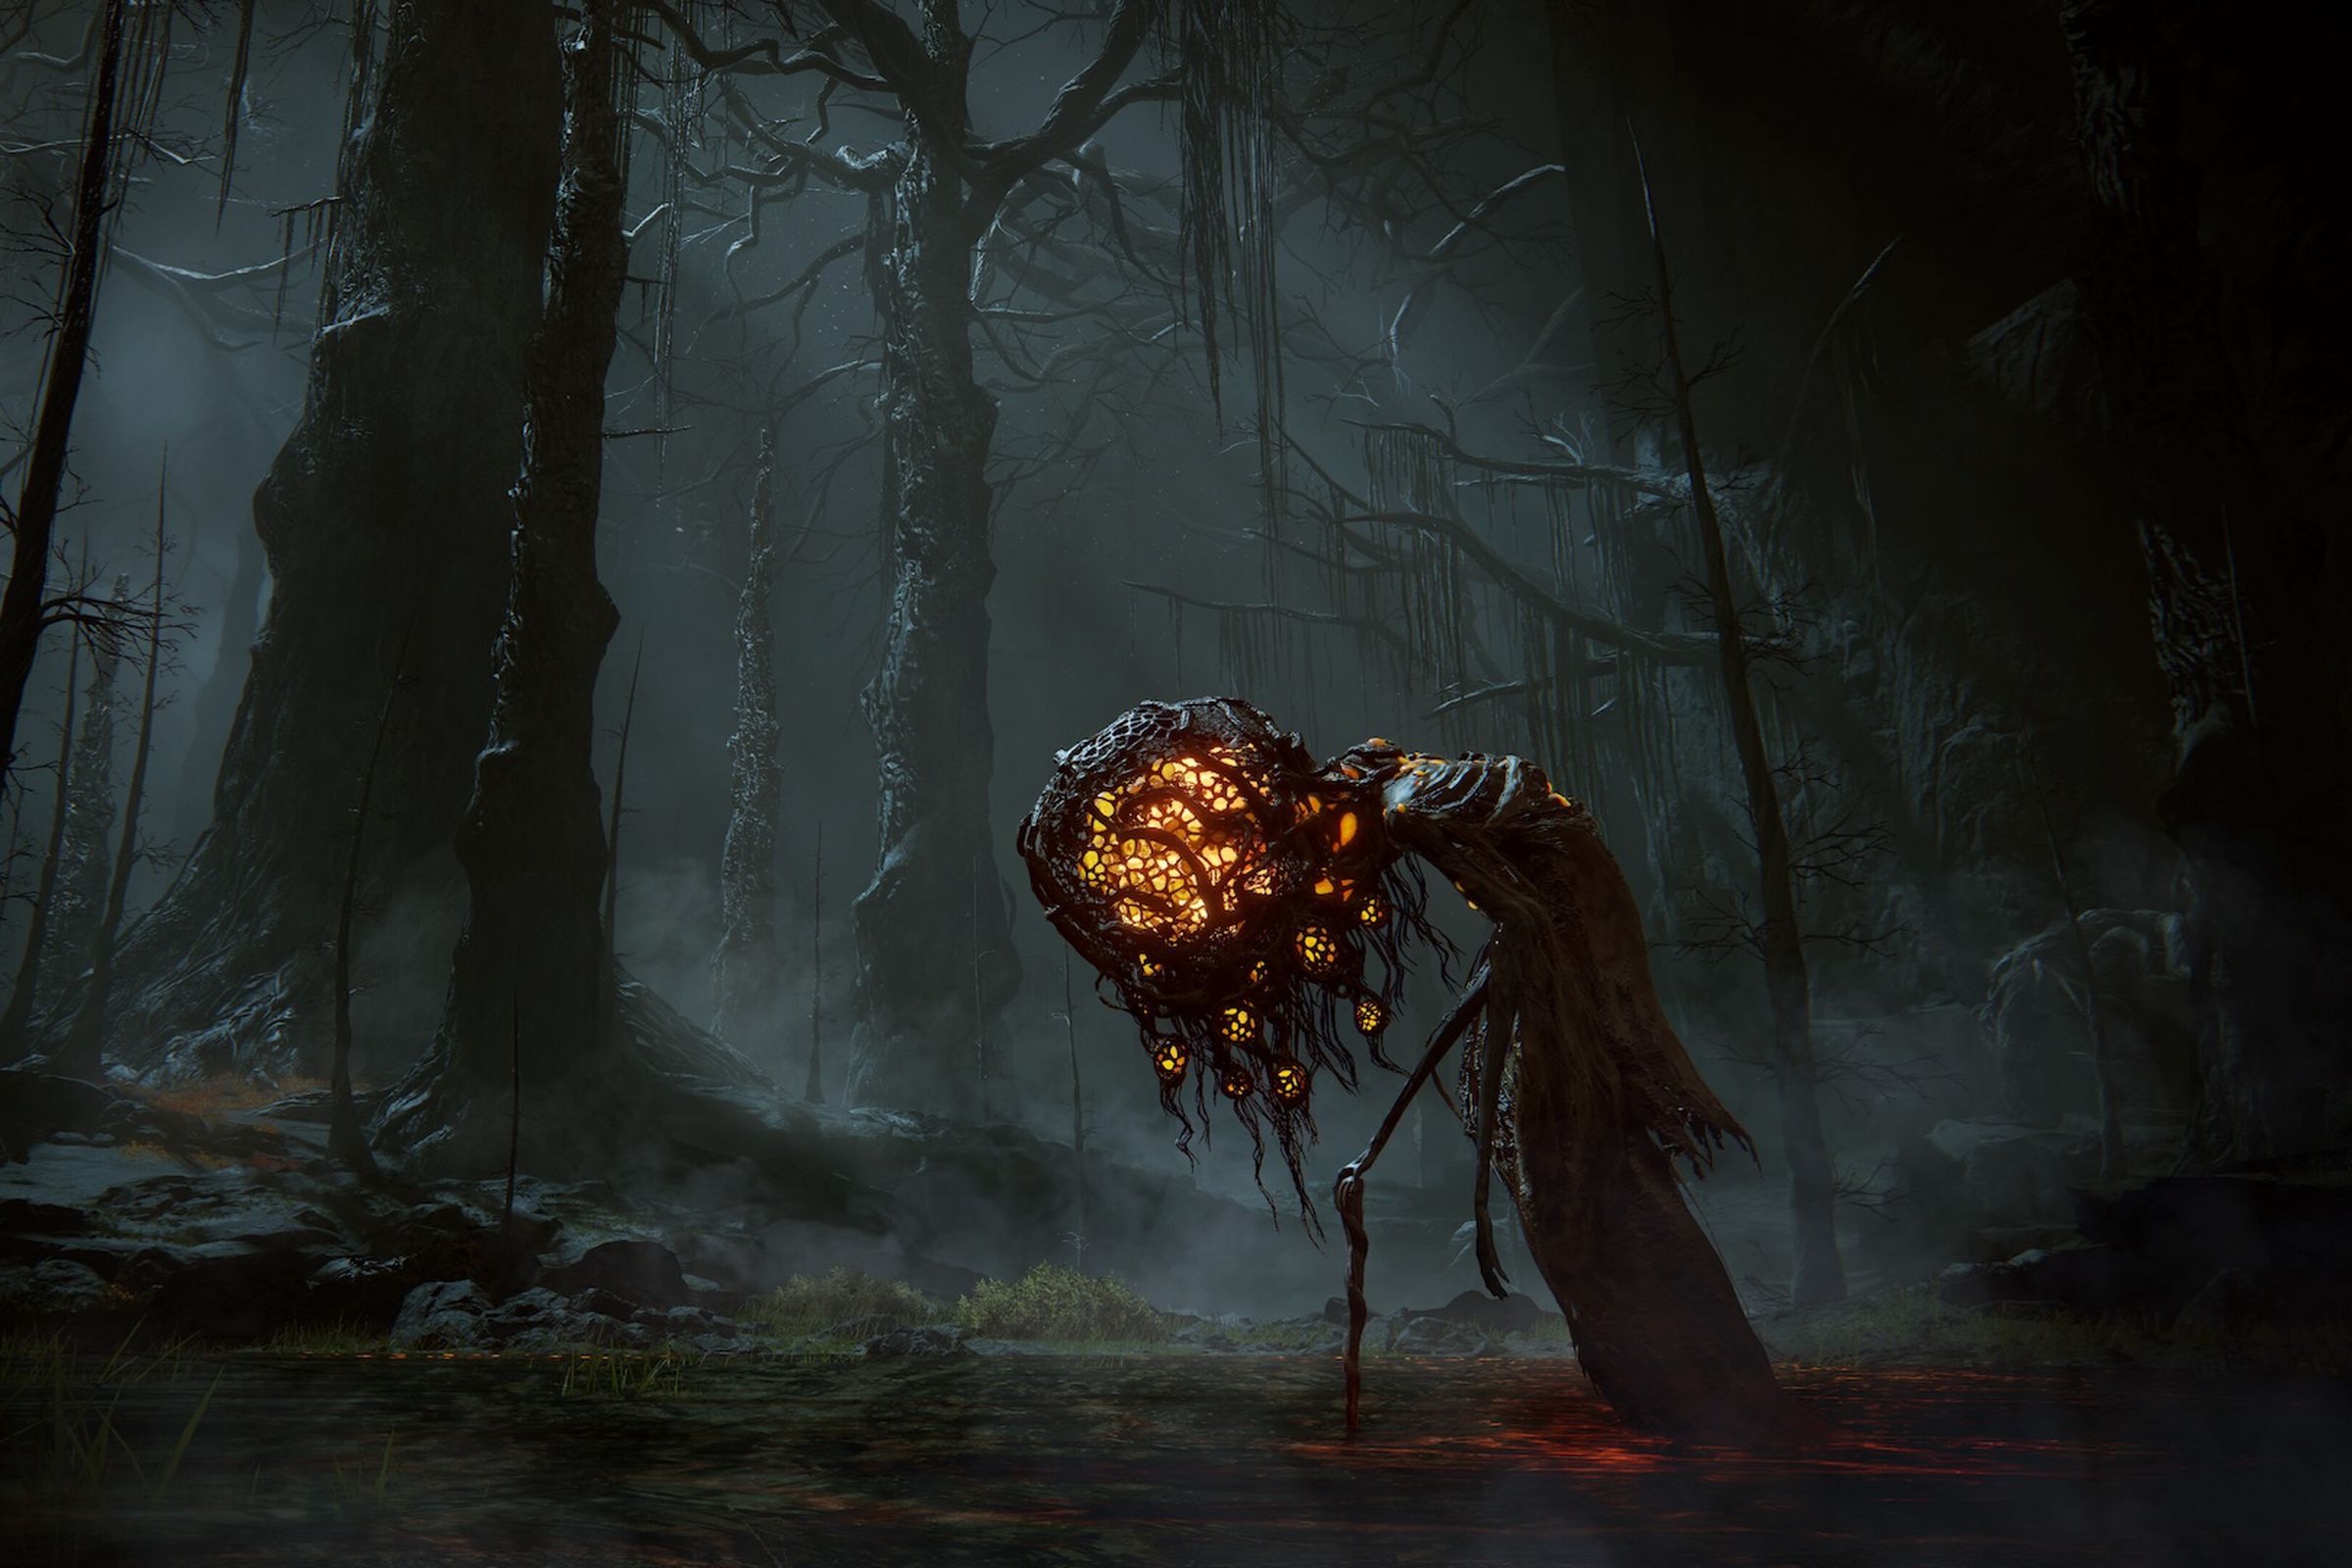 Screenshot from Shadow of the Erdtree featuring a monster with a very large glowing wasps nest for a head.